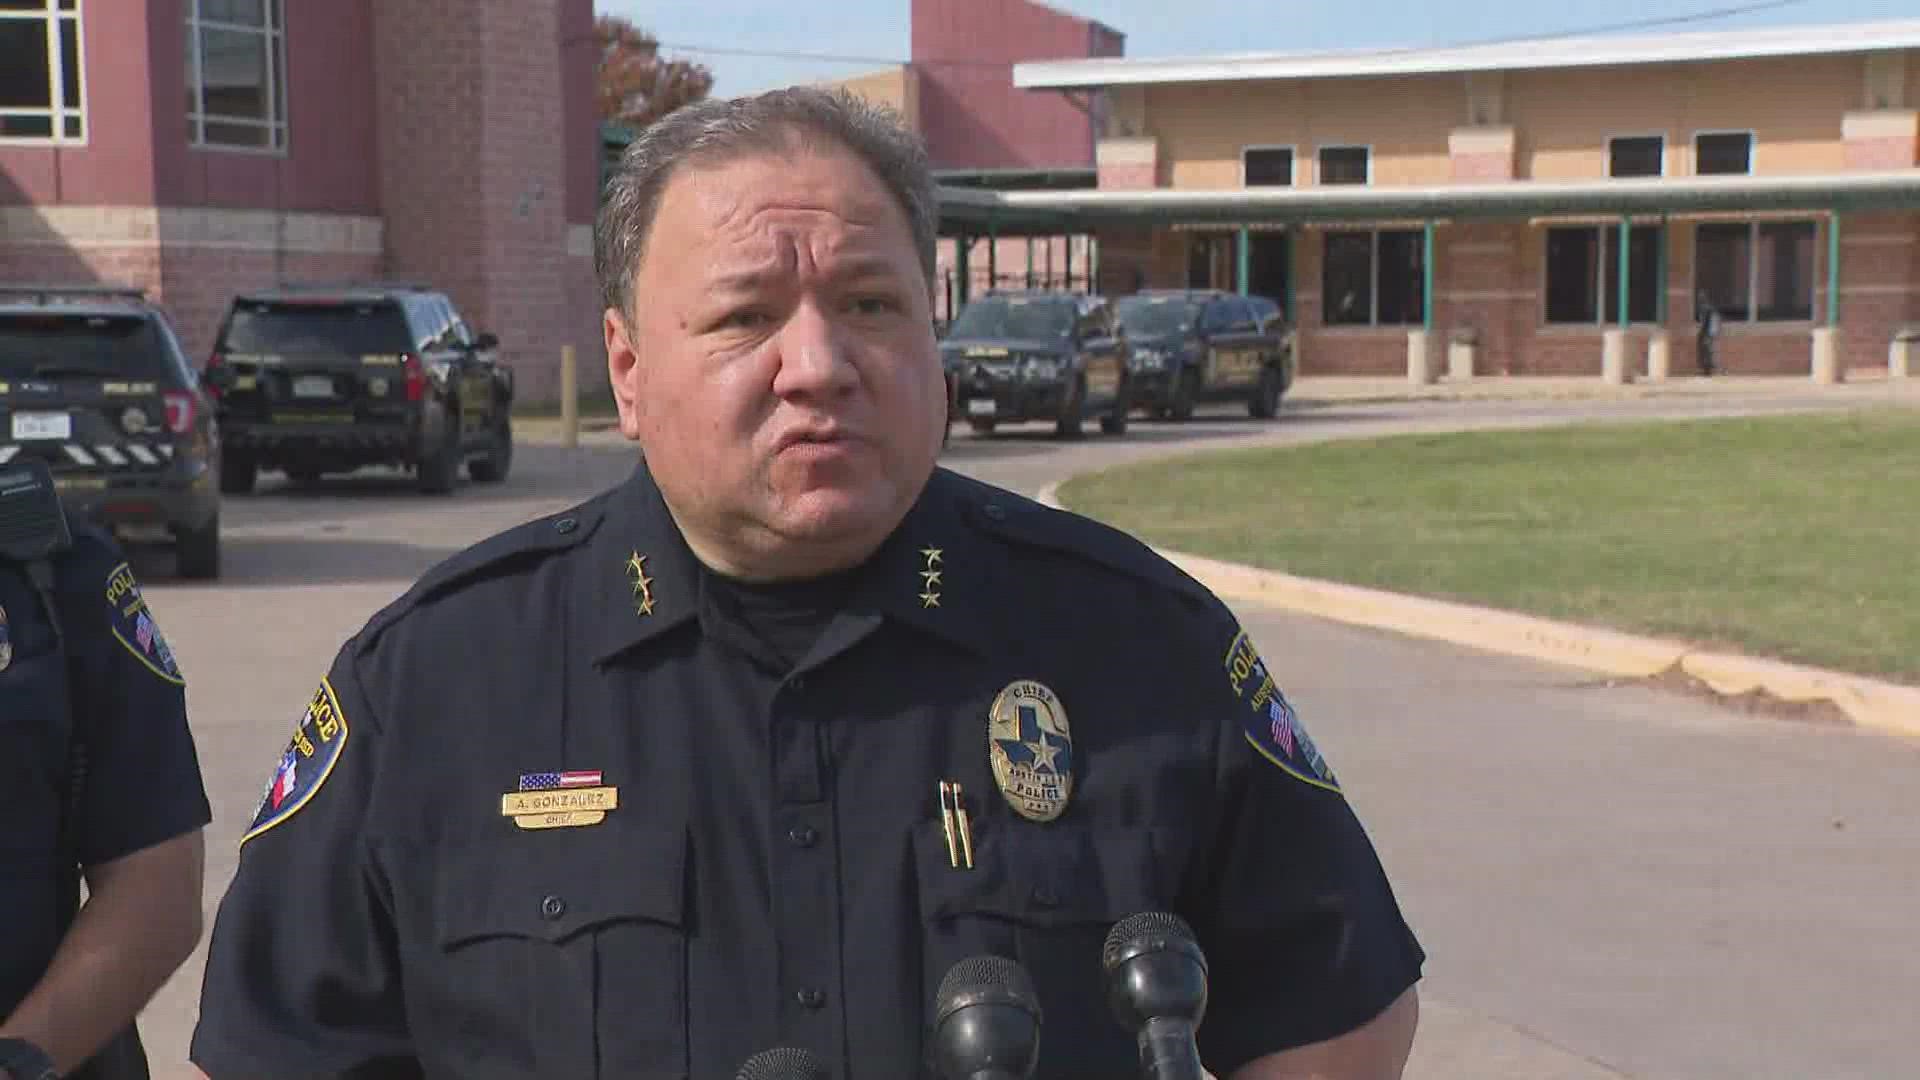 Police said no weapon was found, but one student was in possession of a loaded magazine.